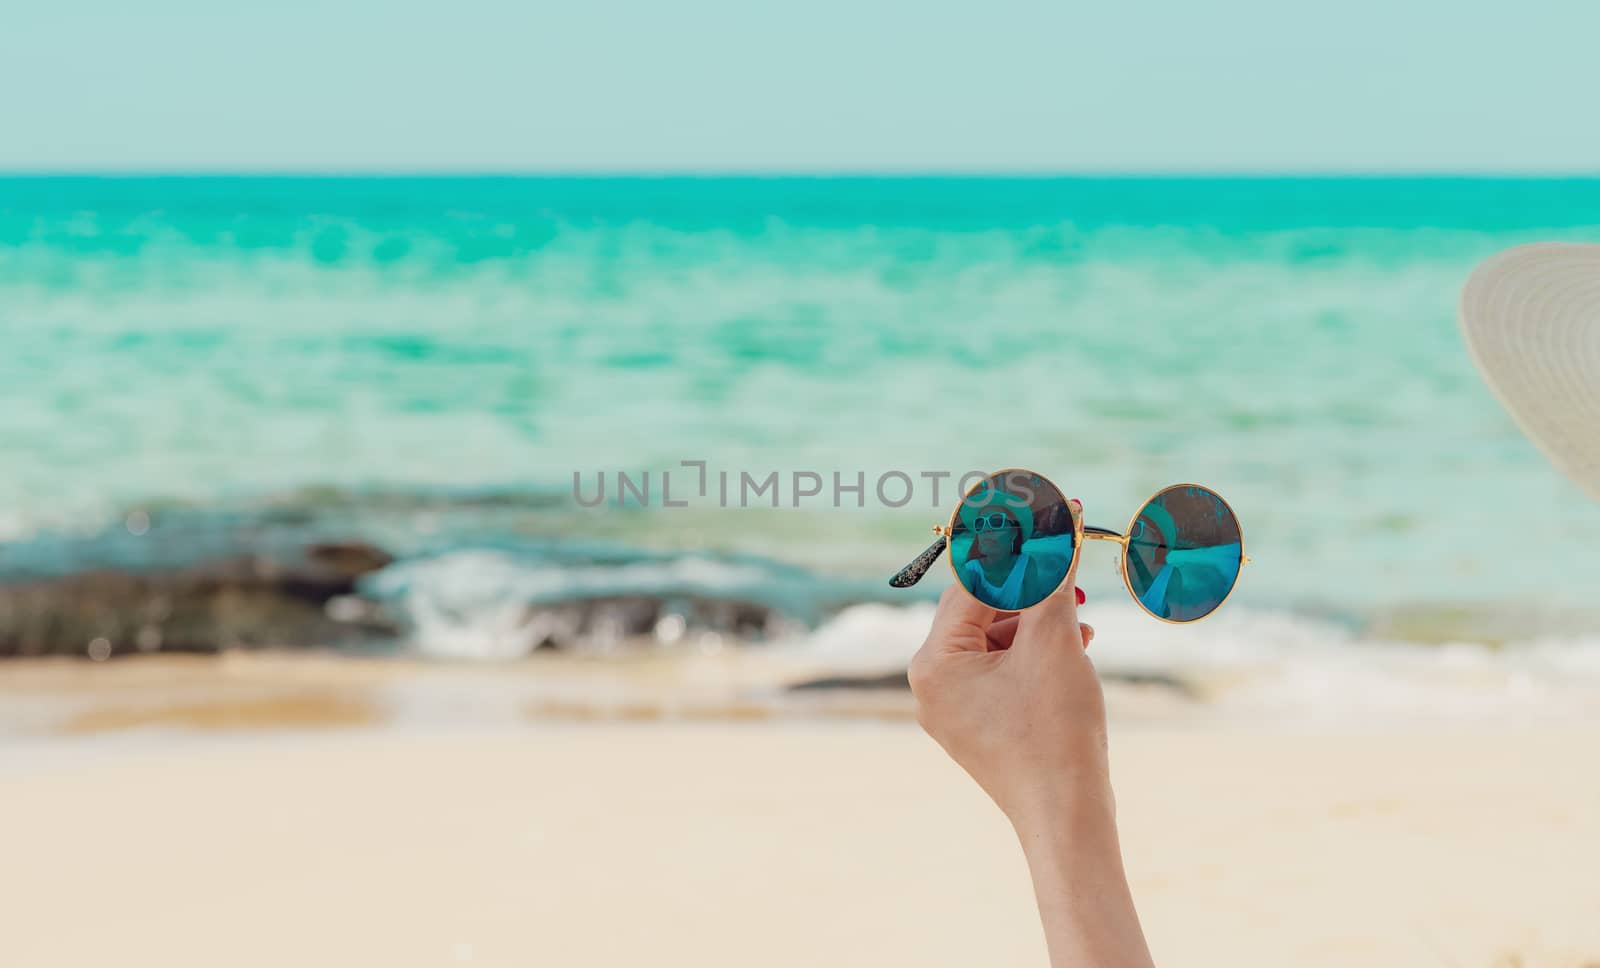 Woman hand holding sunglasses and sit on sand beach. Reflection of woman in sunglasses. Women wear straw hat relax at tropical beach on summer vacation. Sunny day on holiday. Travel alone on summer.